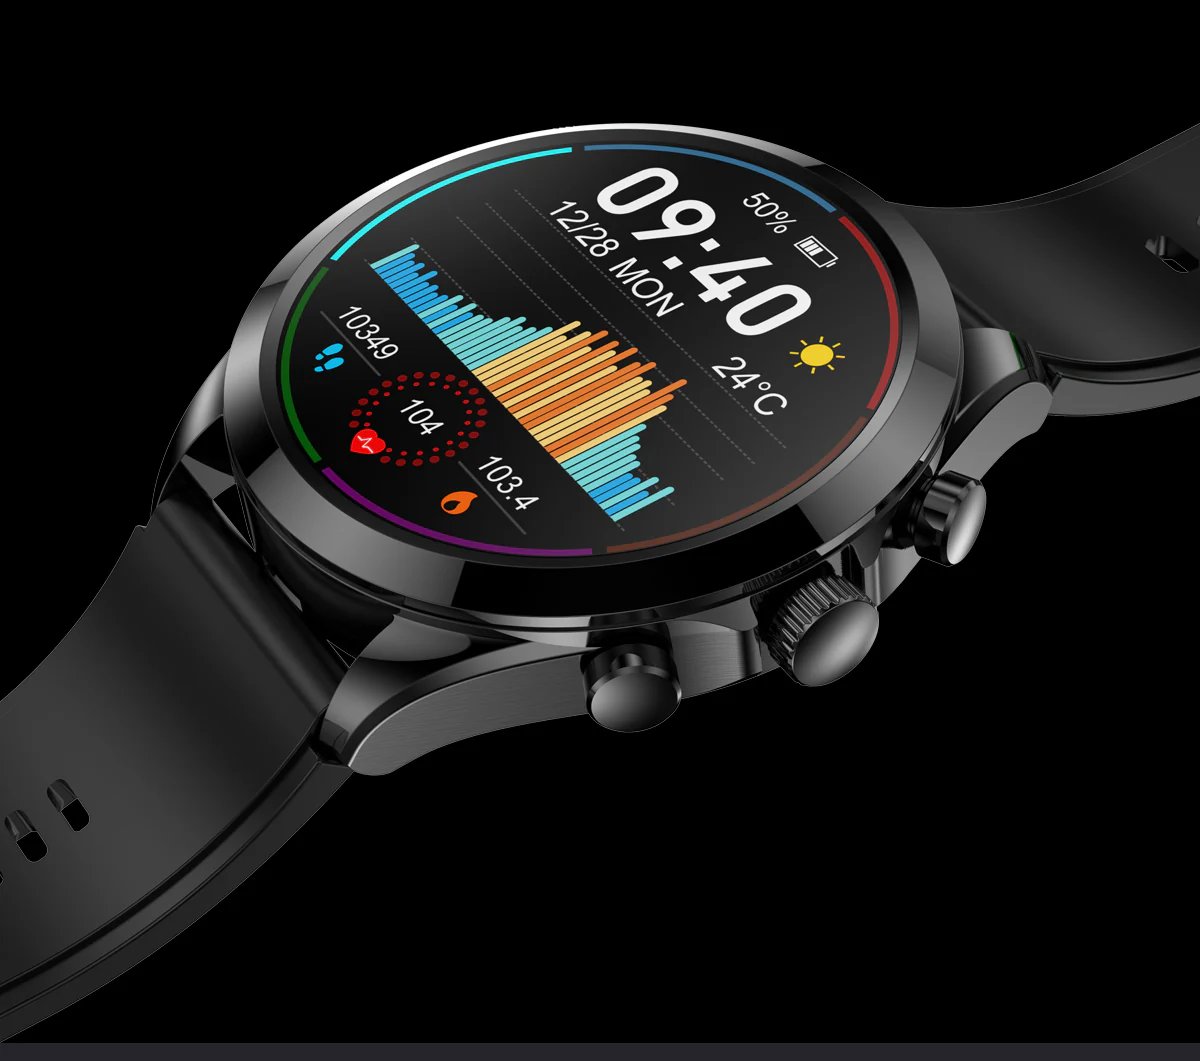 1.39Inch HD color screen

With high definition screen, restore nature pure color, clear and vivid.

twellmall.com/collections/fi…
#smartwatches #BLACKWATCH #wearabletech